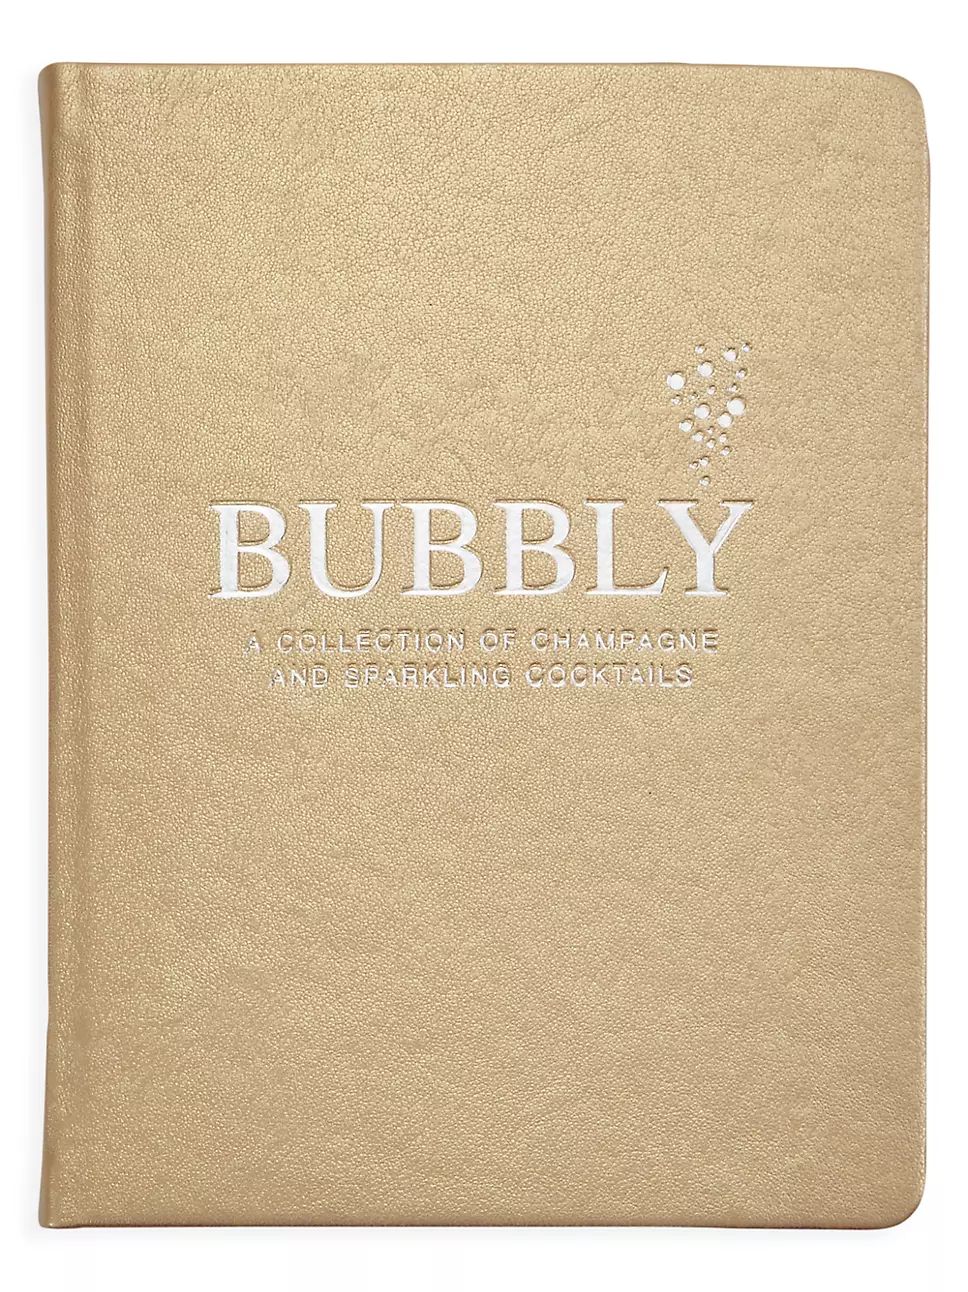 Bubbly: A Collection Of Champagne & Sparkling Cocktails | Saks Fifth Avenue